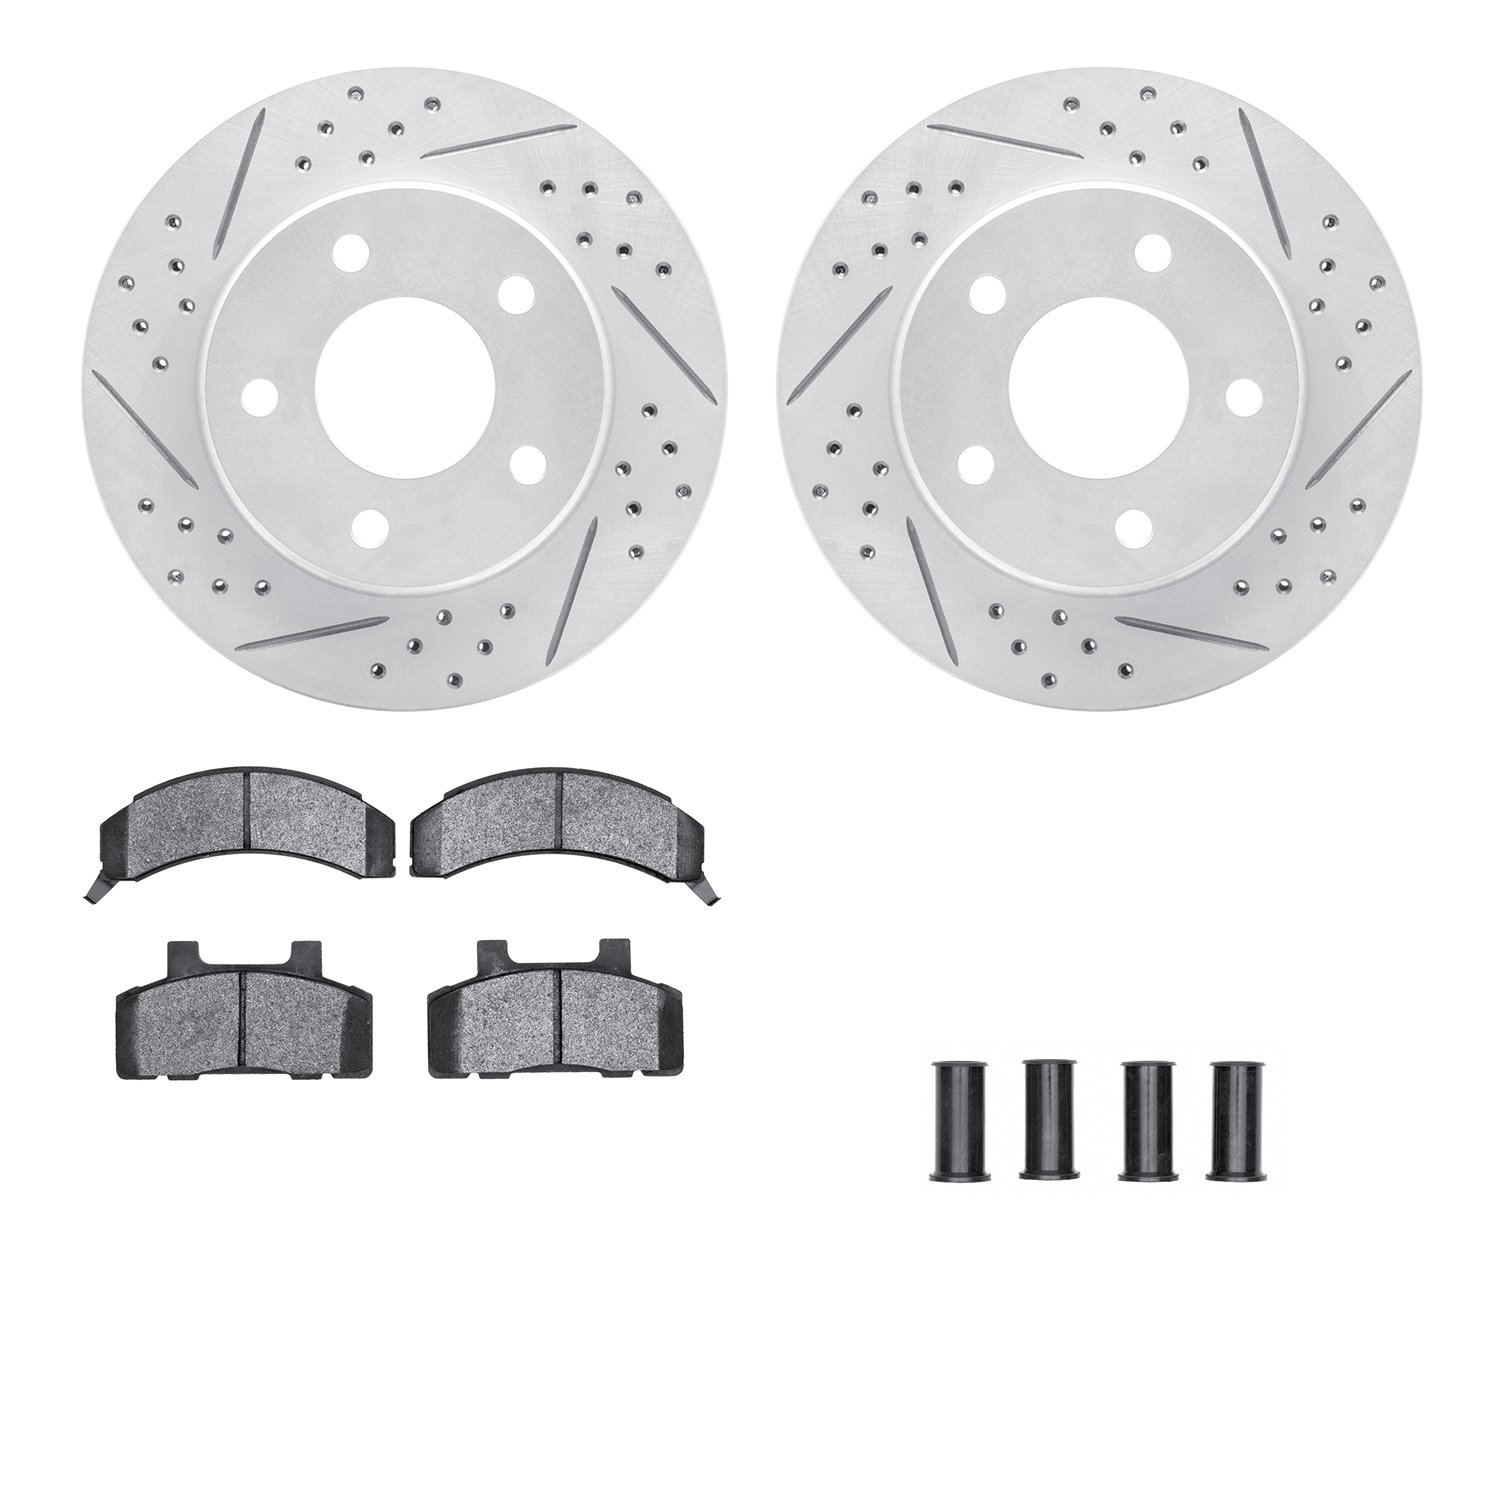 2512-45001 Geoperformance Drilled/Slotted Rotors w/5000 Advanced Brake Pads Kit & Hardware, 1990-1996 GM, Position: Front